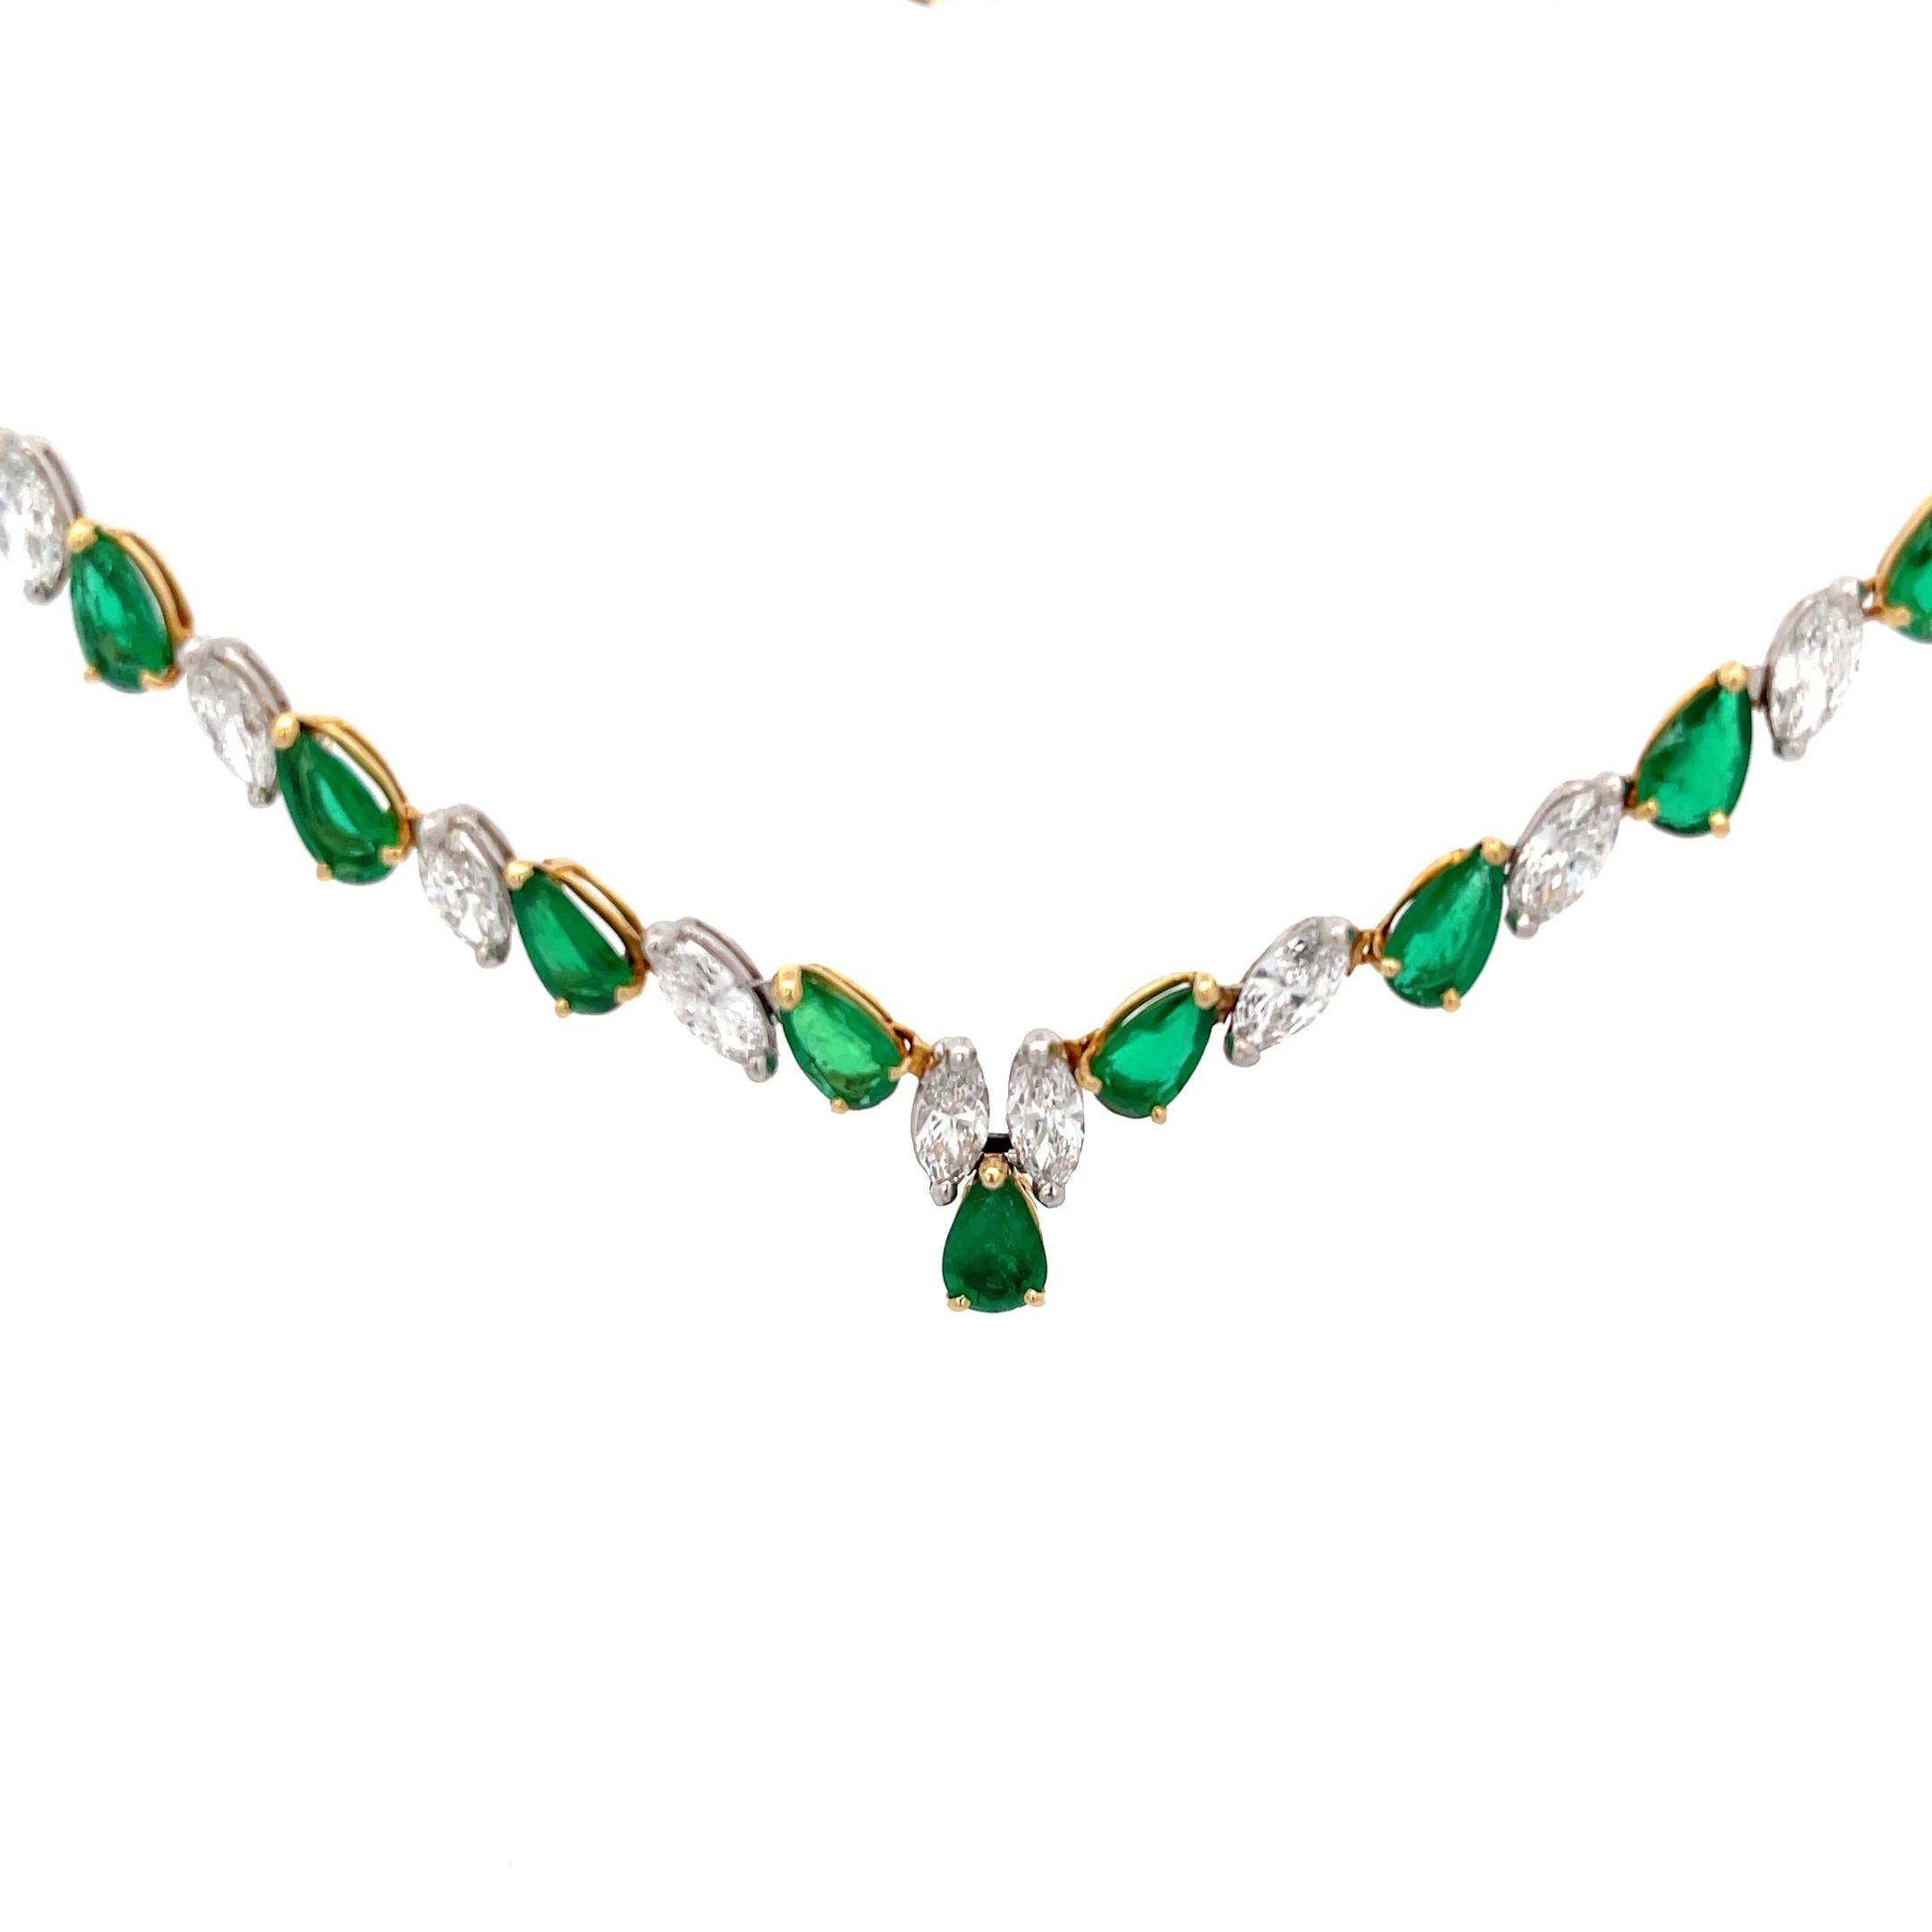 Estate Oscar Heyman Emerald and Diamond Necklace in 18K Yellow Gold. The necklace features 6.40ctw of pear shape emeralds and 4.20ctw of marquise shape diamonds. 
16